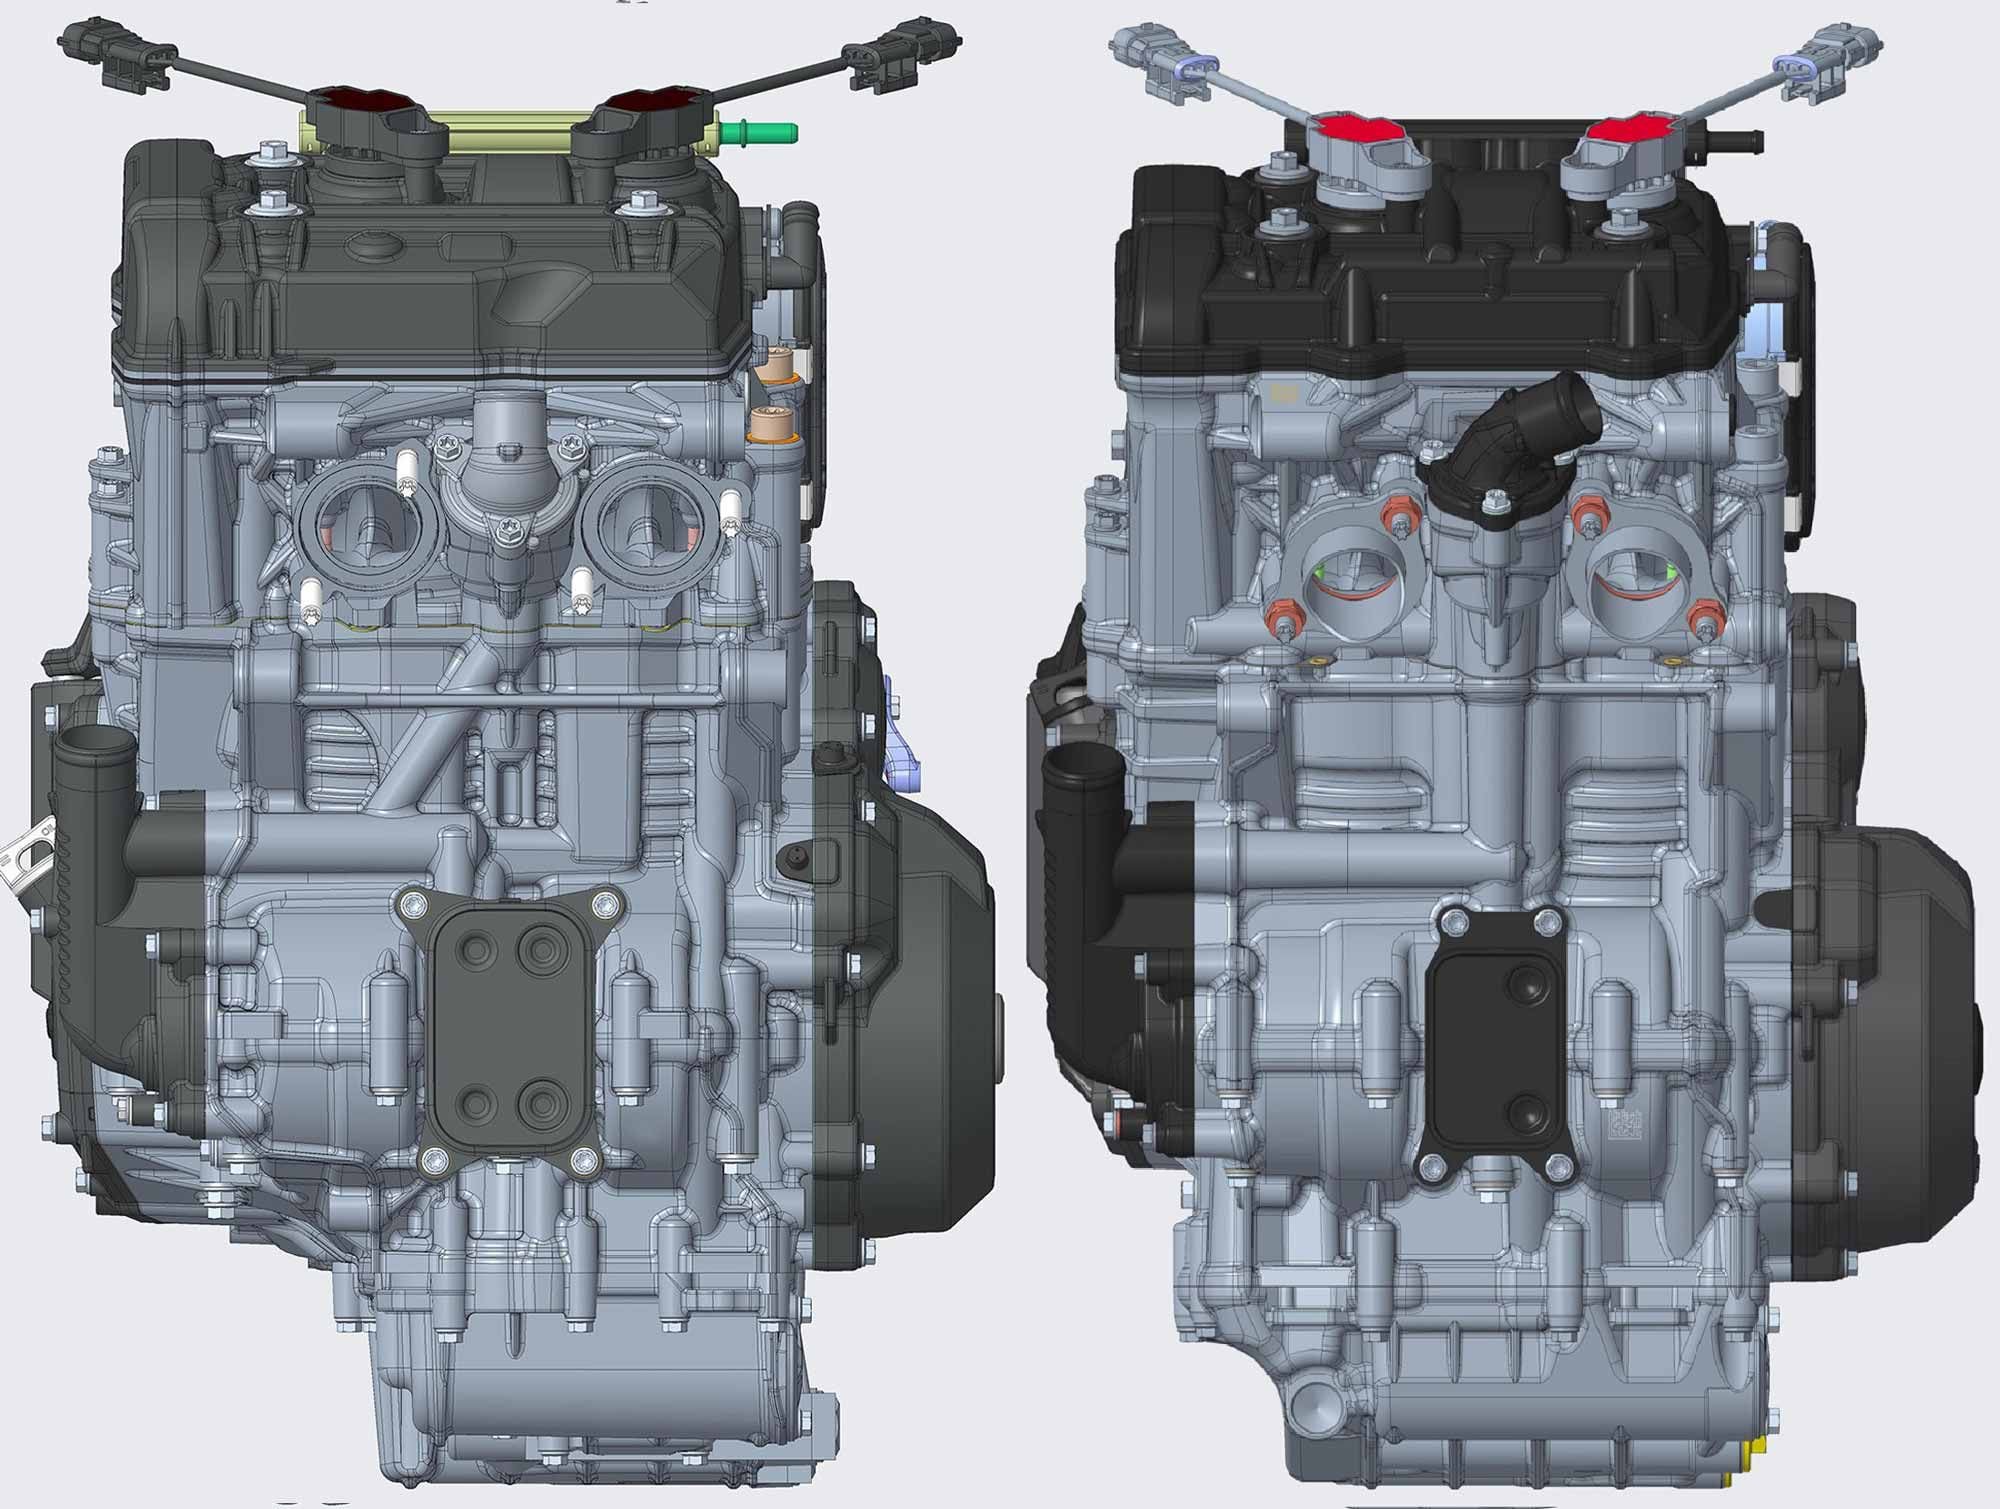 Another side-by-side comparison of the new (left) and current (right) KTM engine.